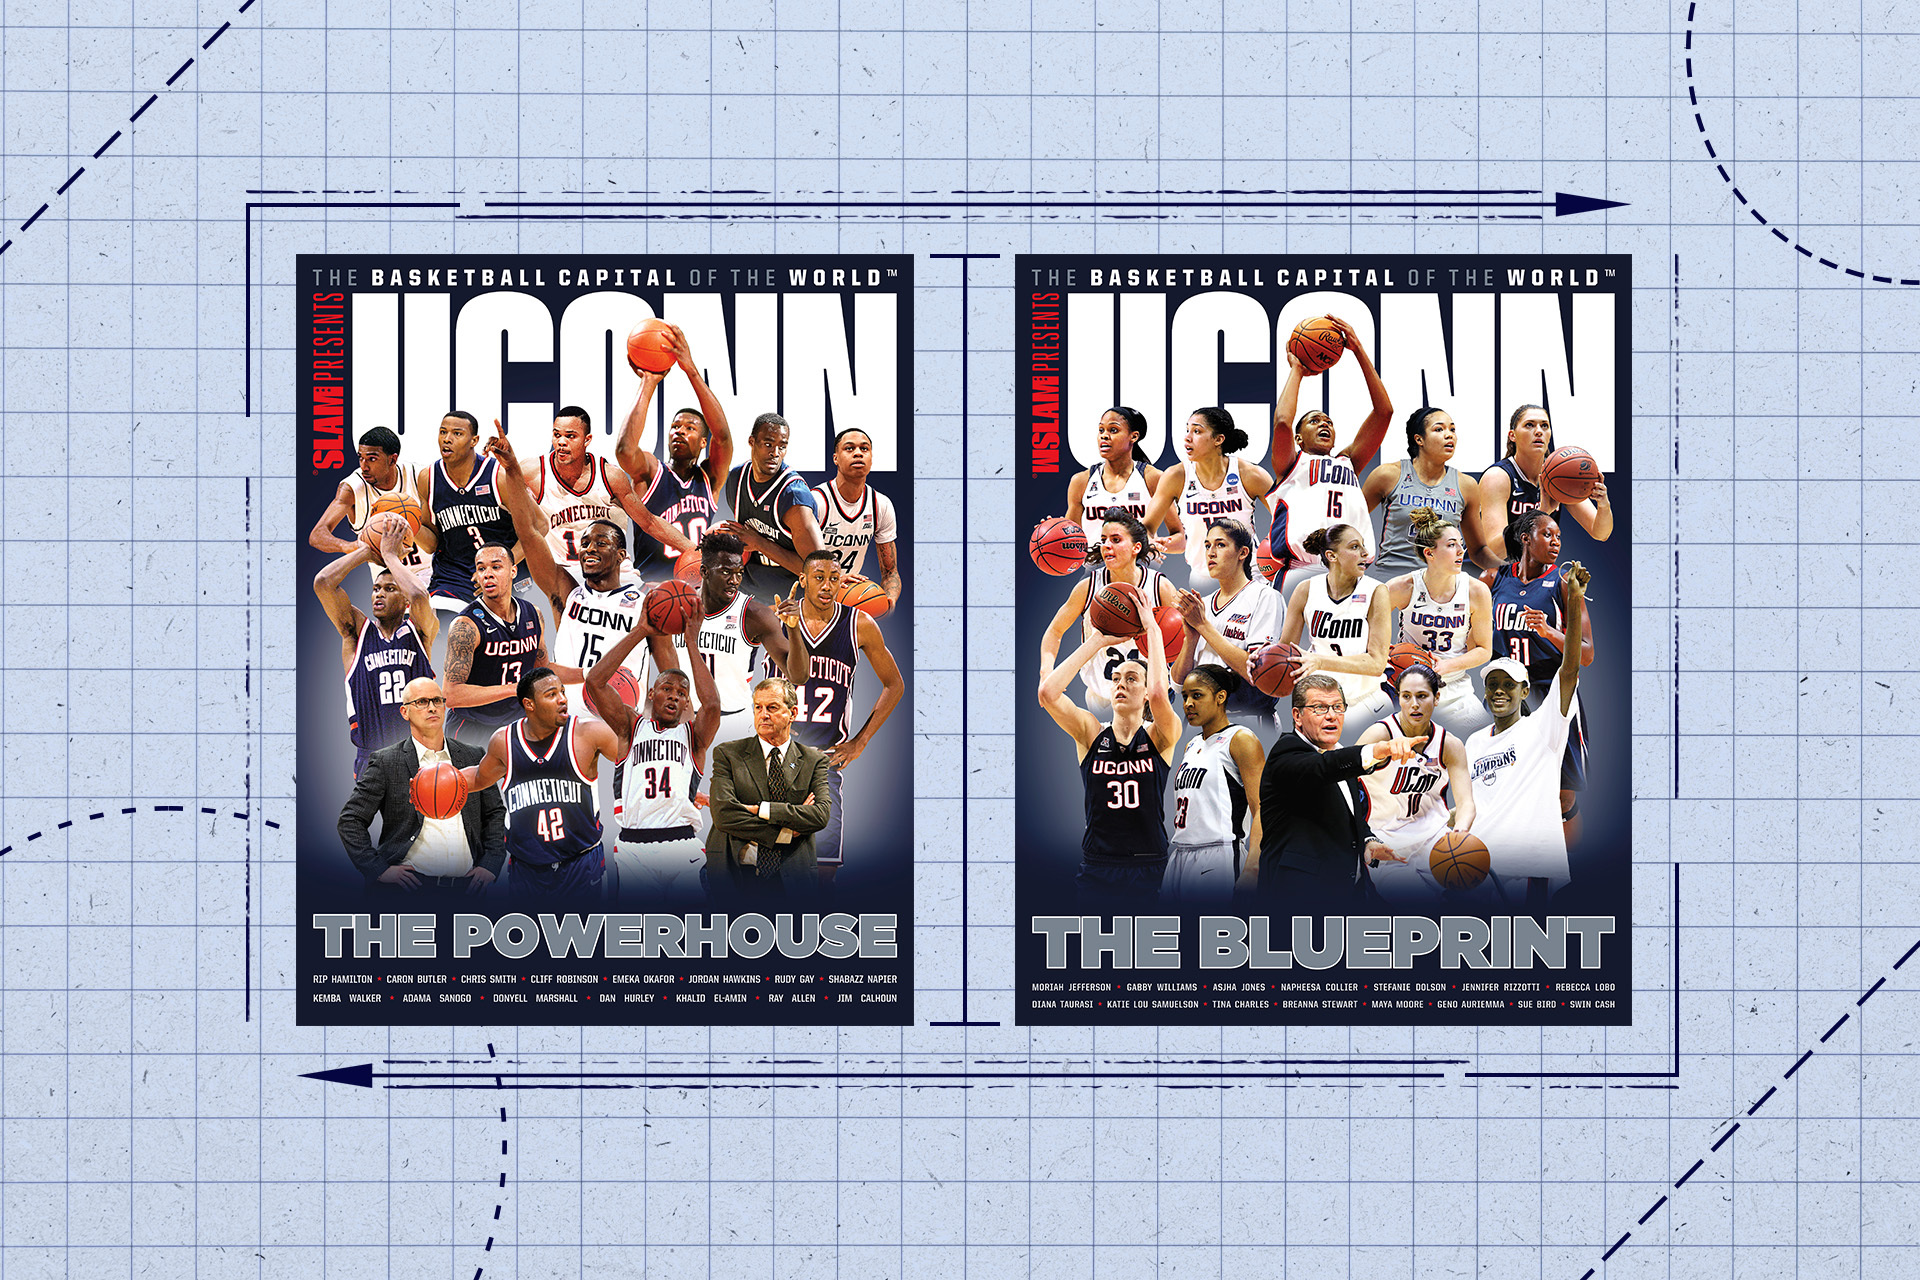 Geno Auriemma Talks Legacy, the Early Years and Creating the Blueprint for UConn’s Dominance